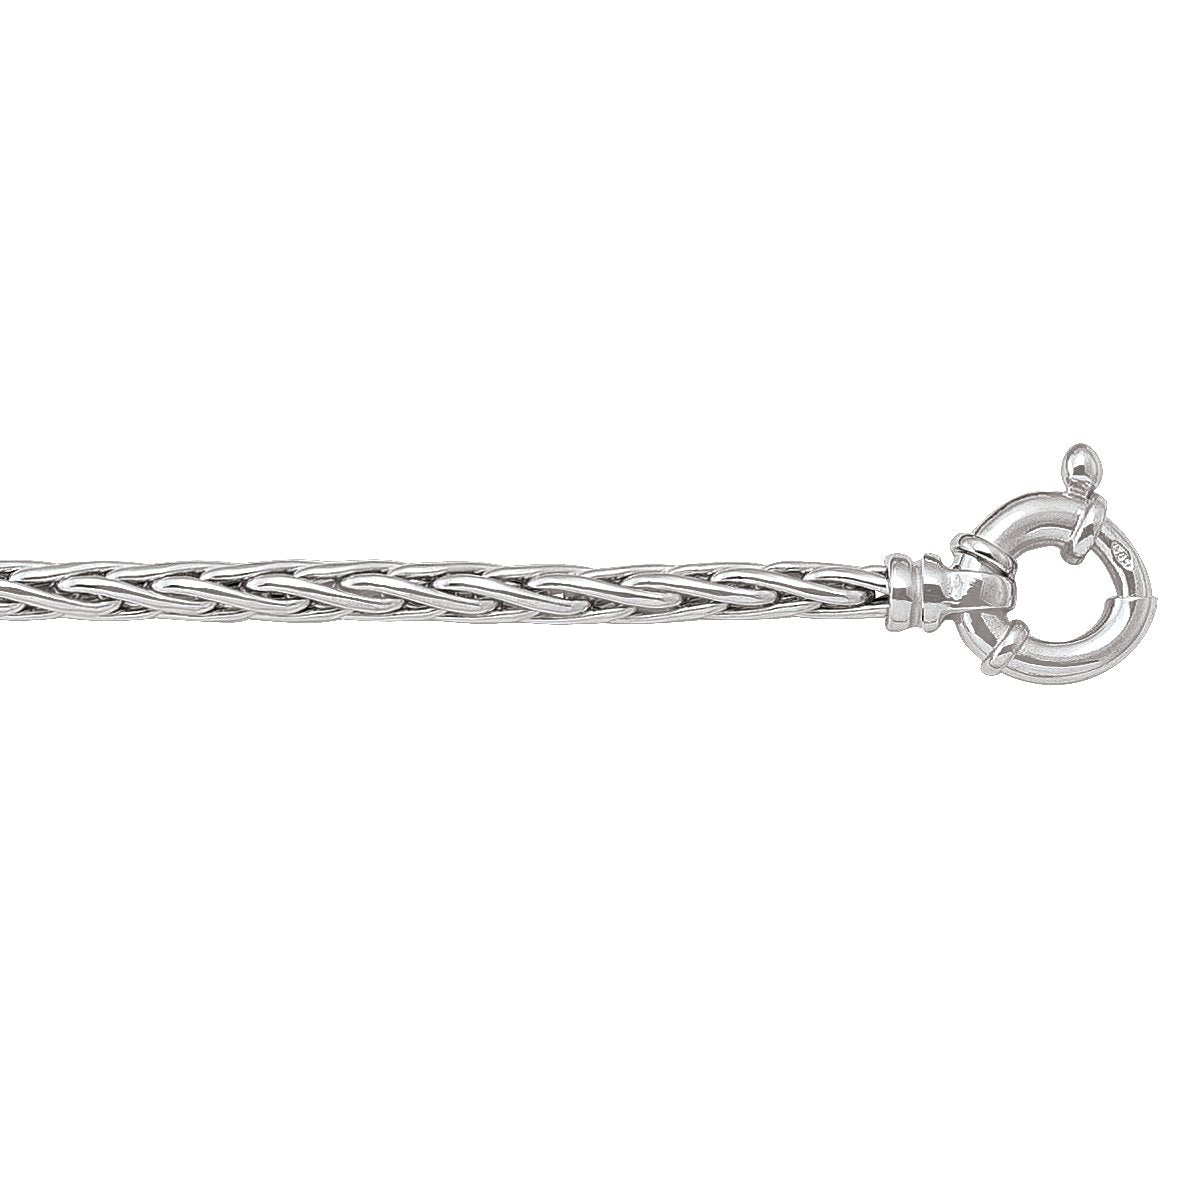 BRACELETS WHITE GOLD HOLLOW WHEAT LINK CHAIN